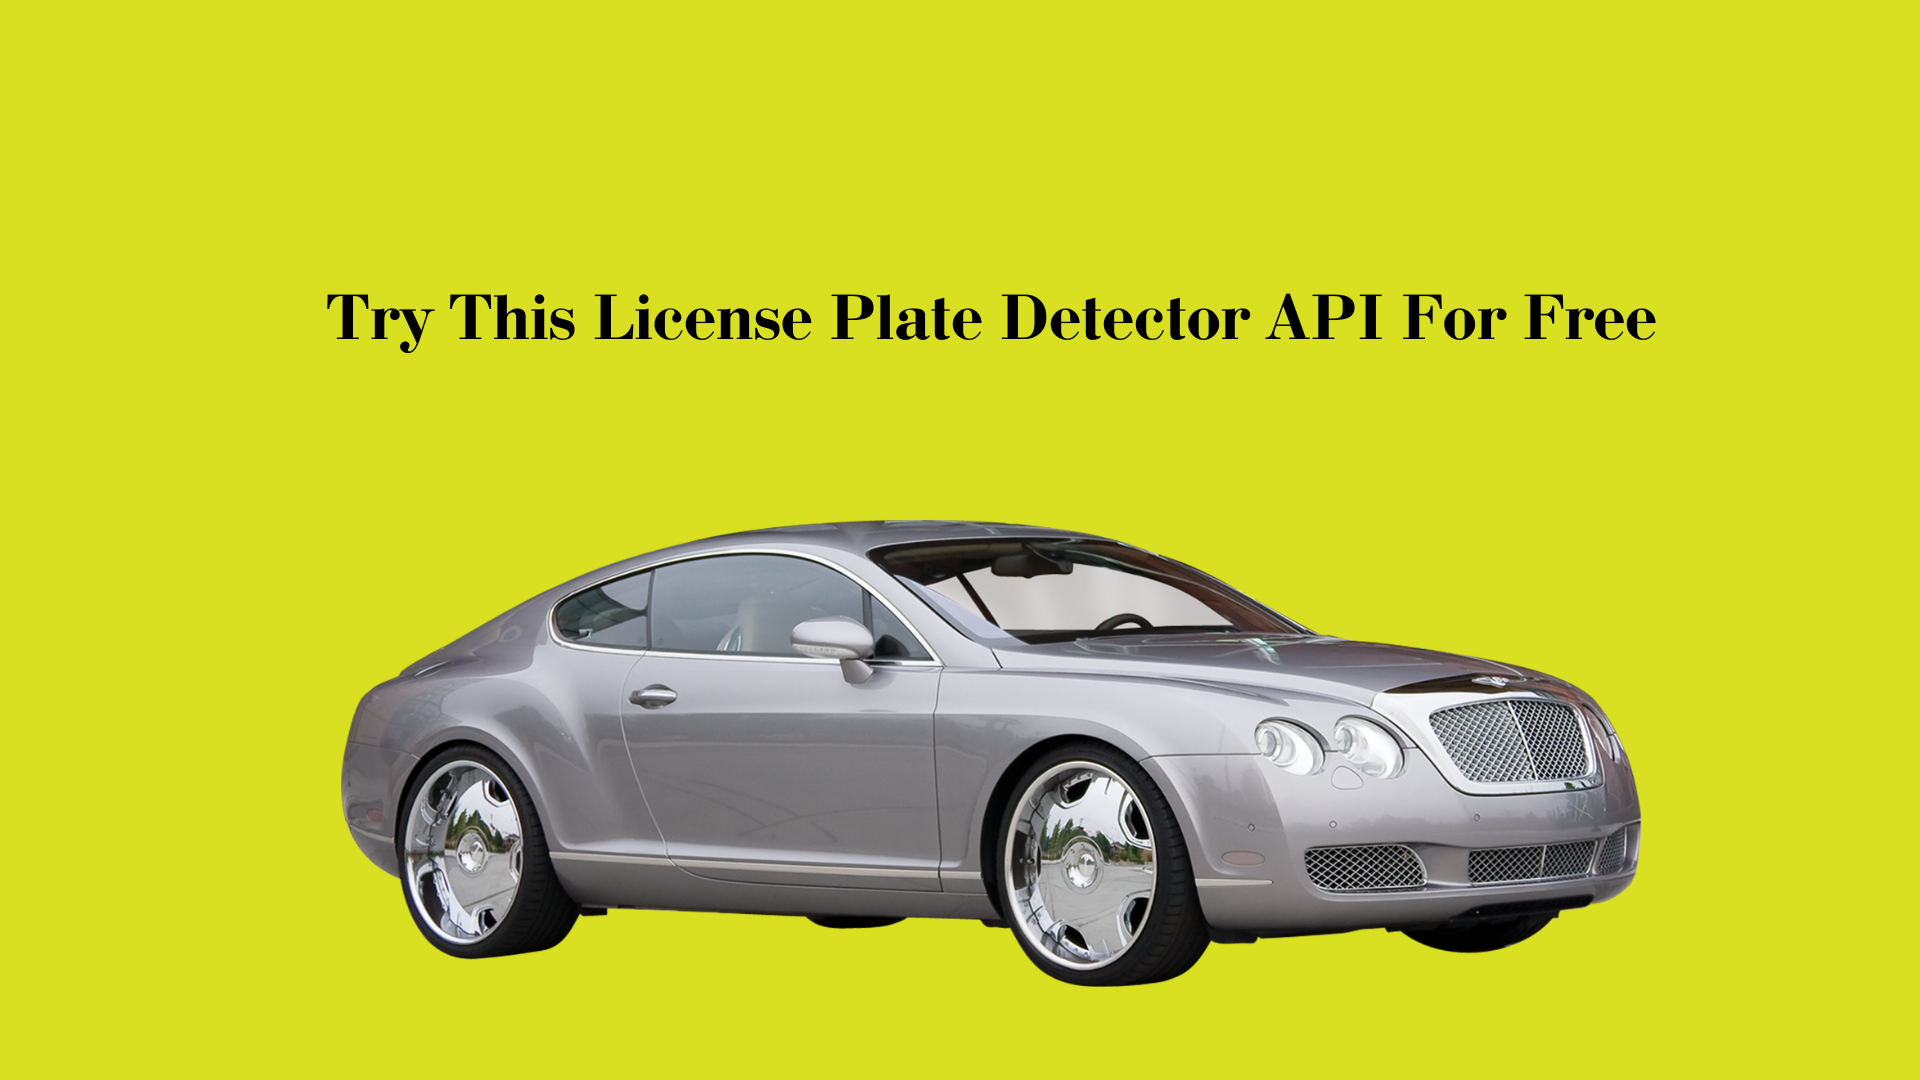 Try This License Plate Detector API For Free